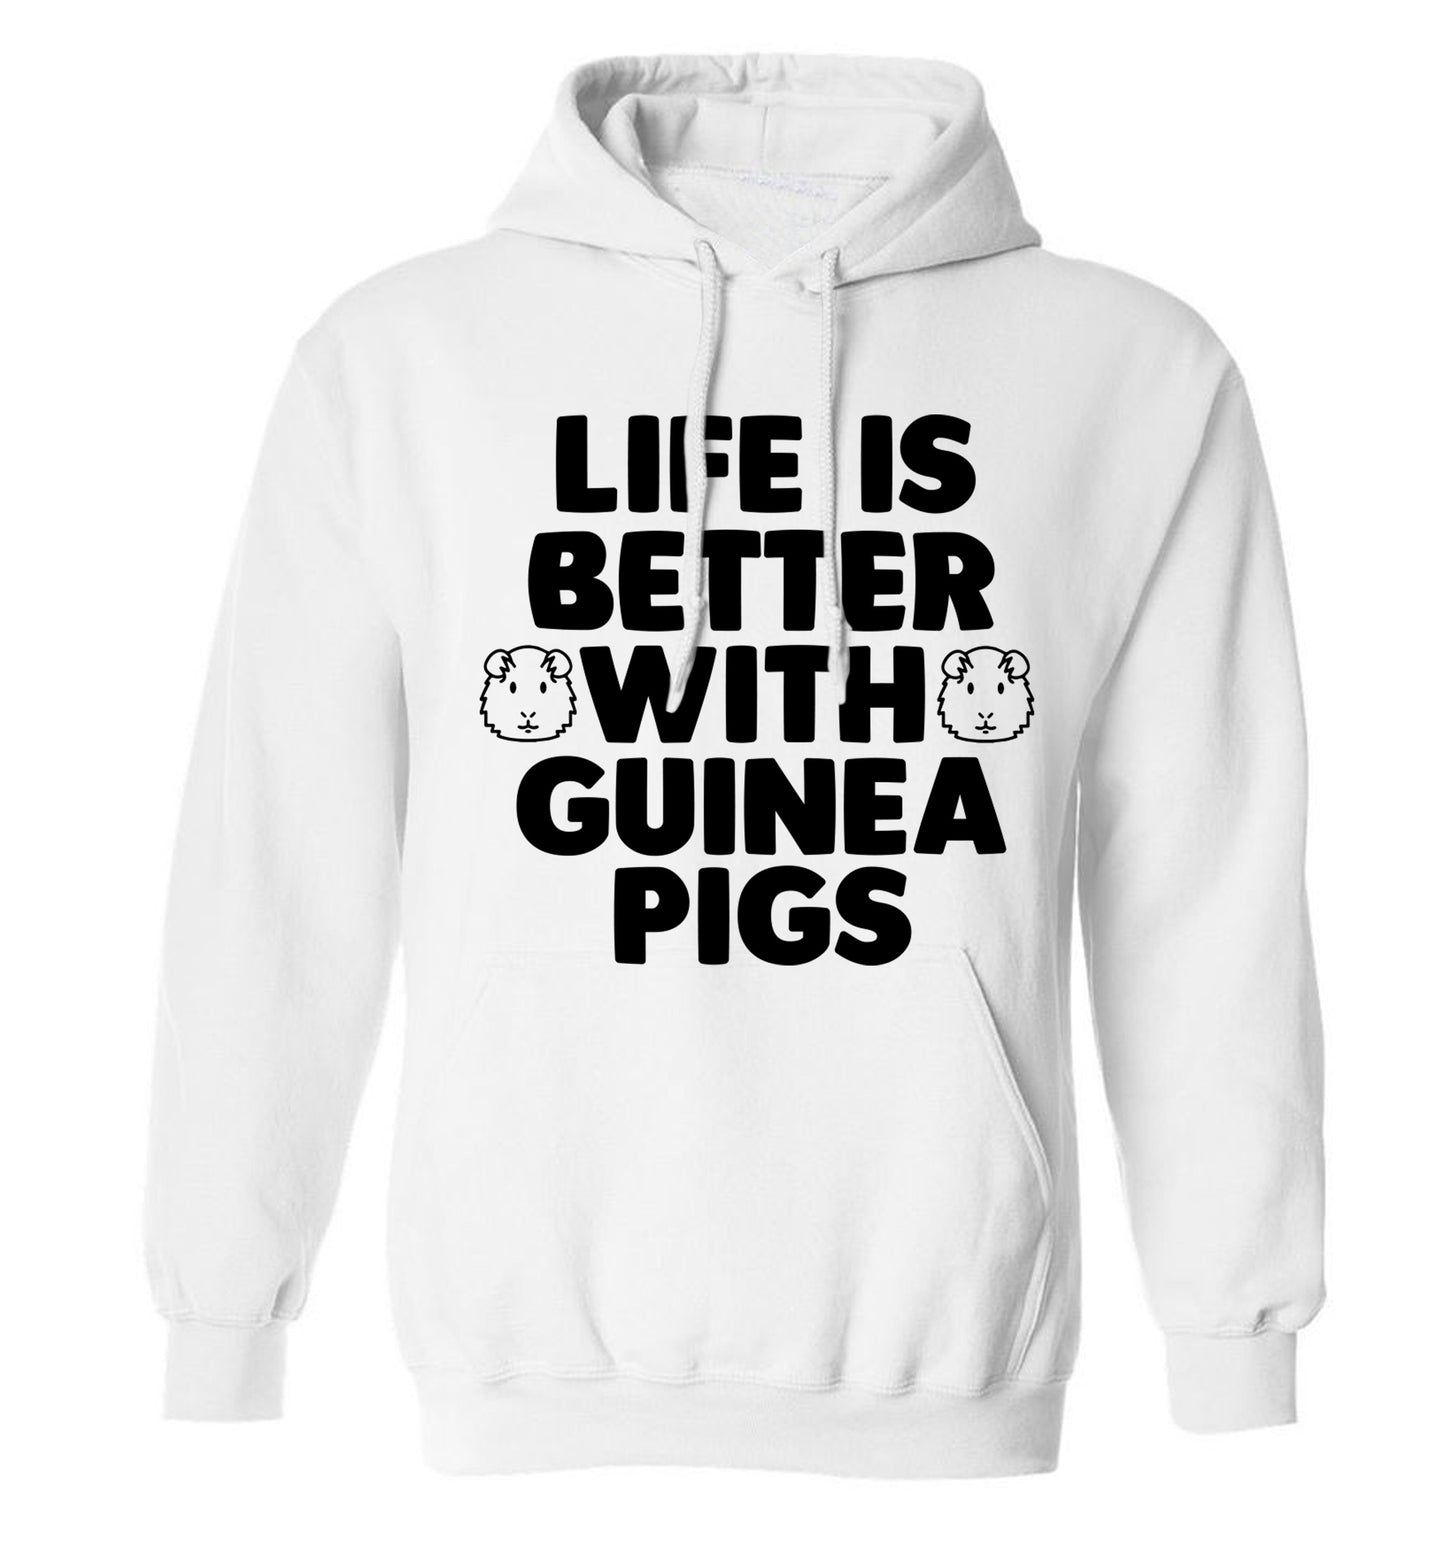 Life is better with guinea pigs adults unisex white hoodie 2XL